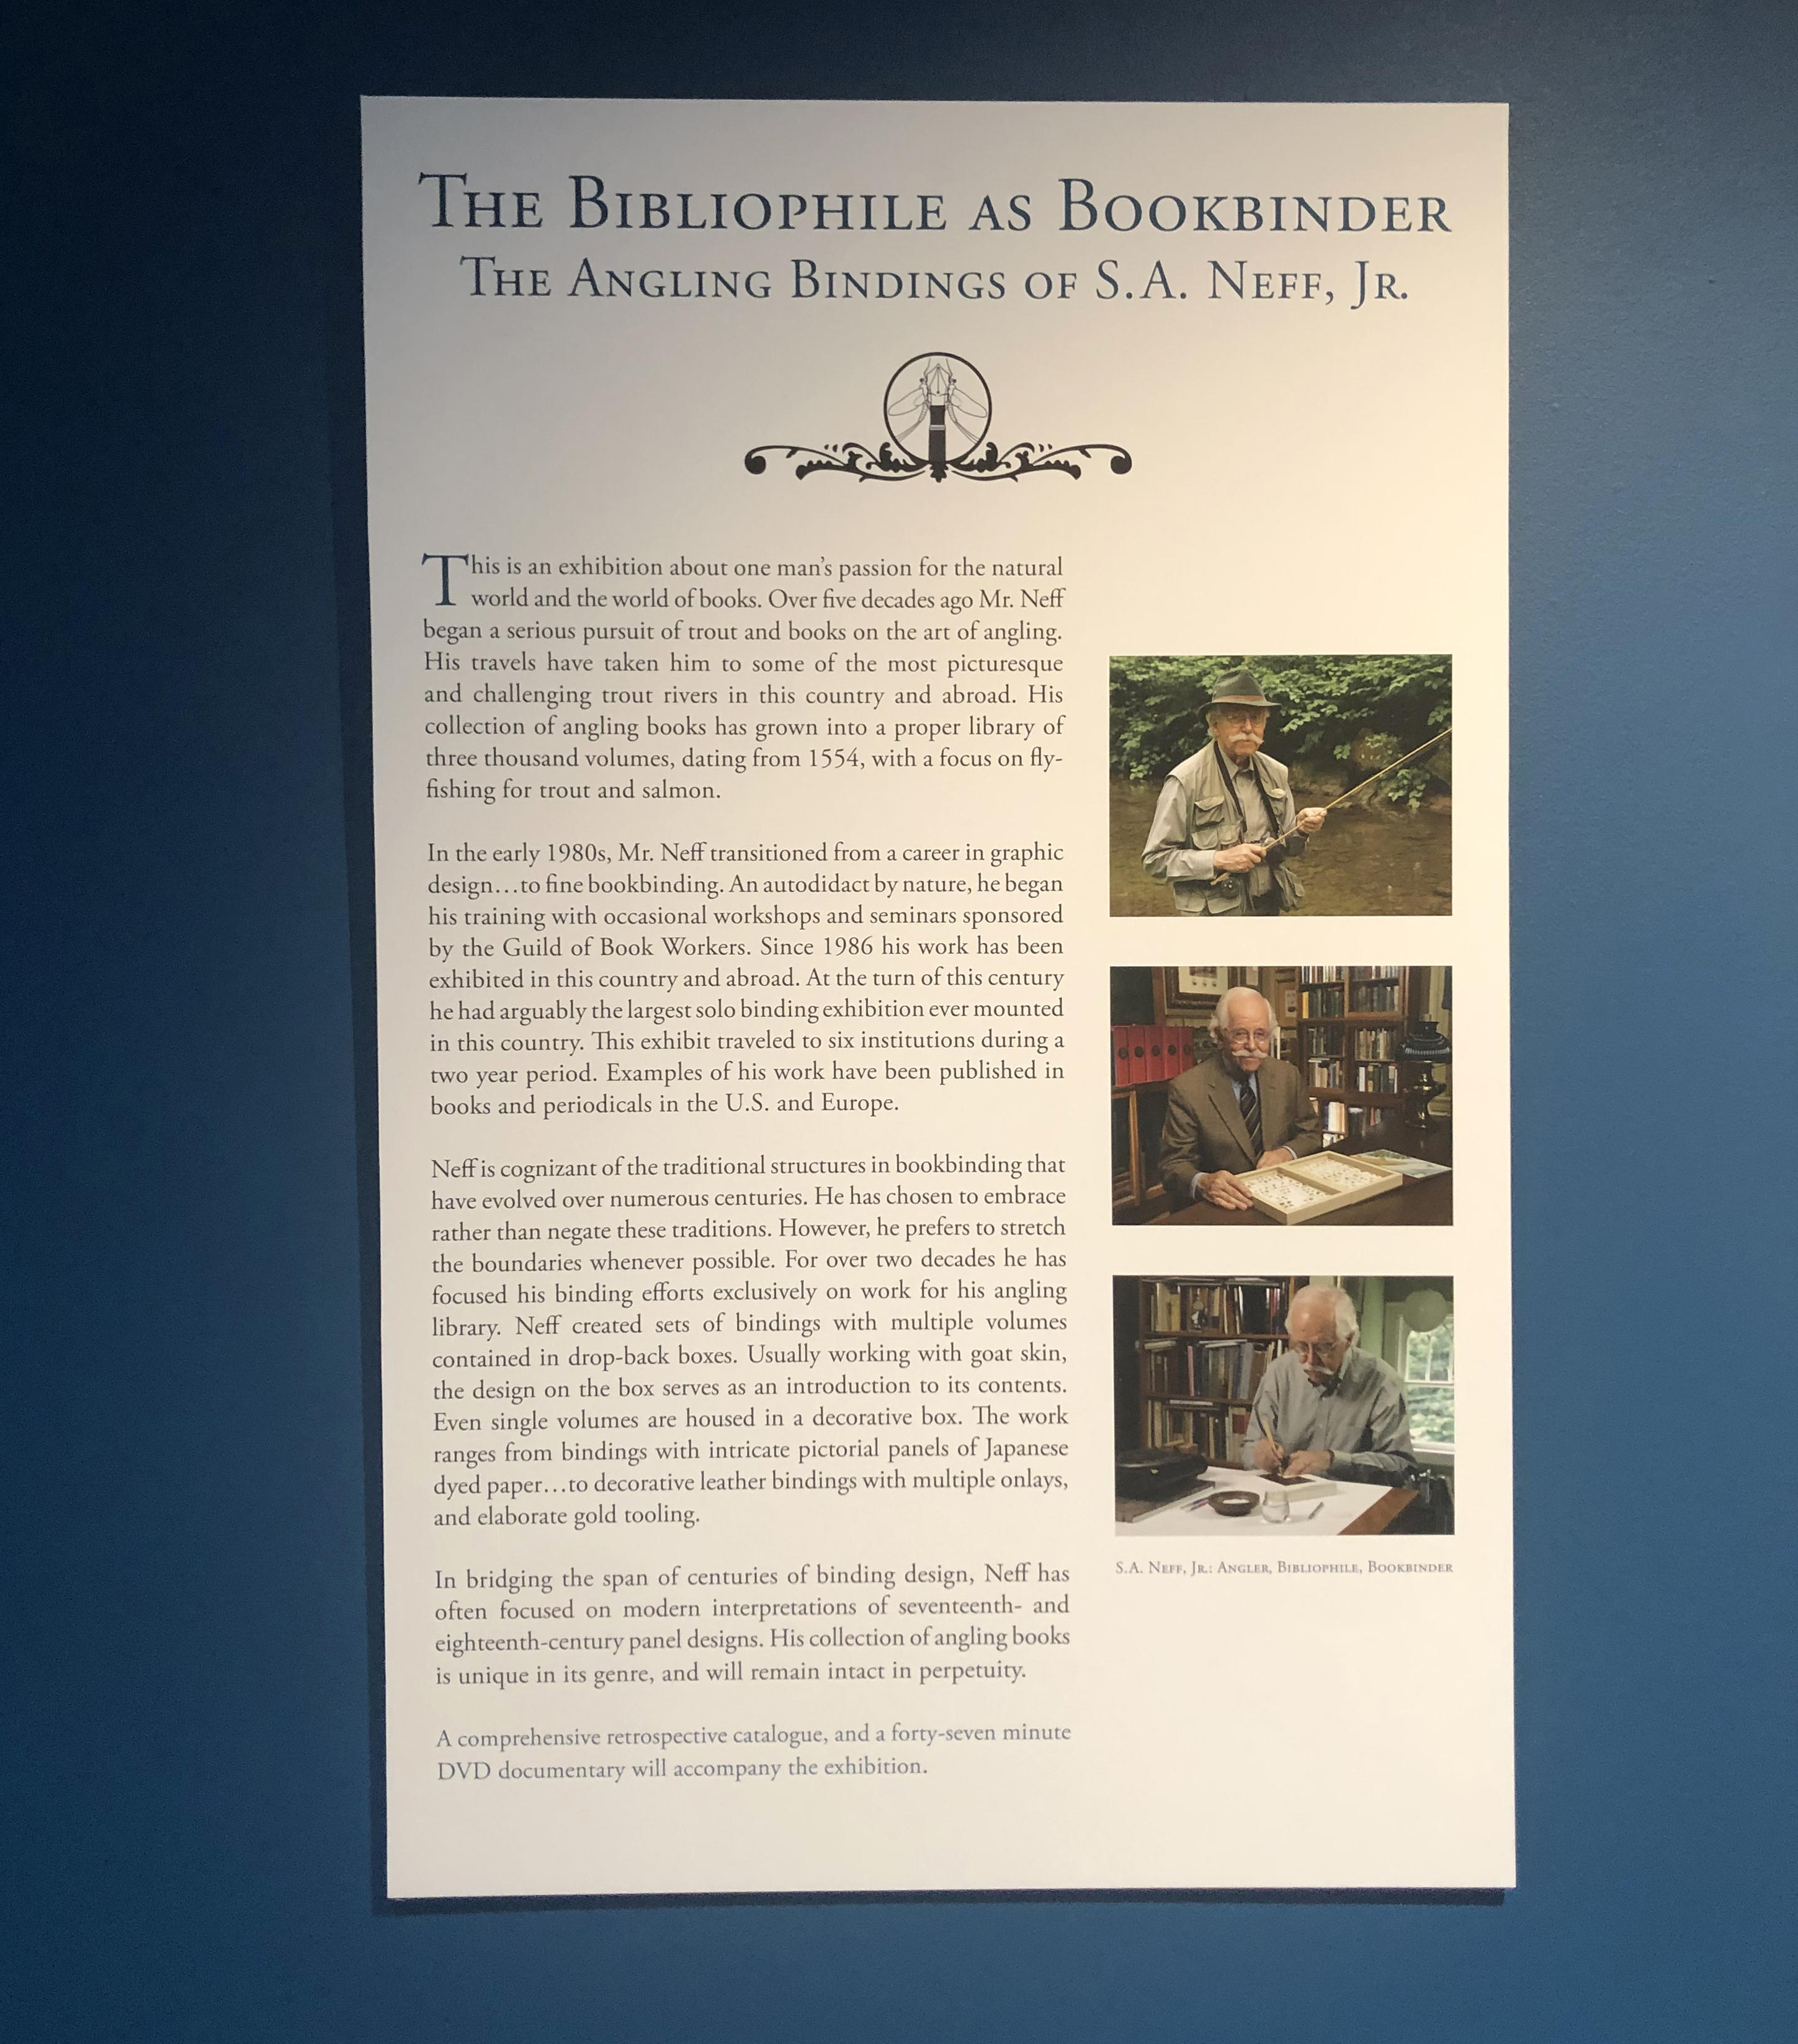 The Bibliophile as Bookbinder Introduction